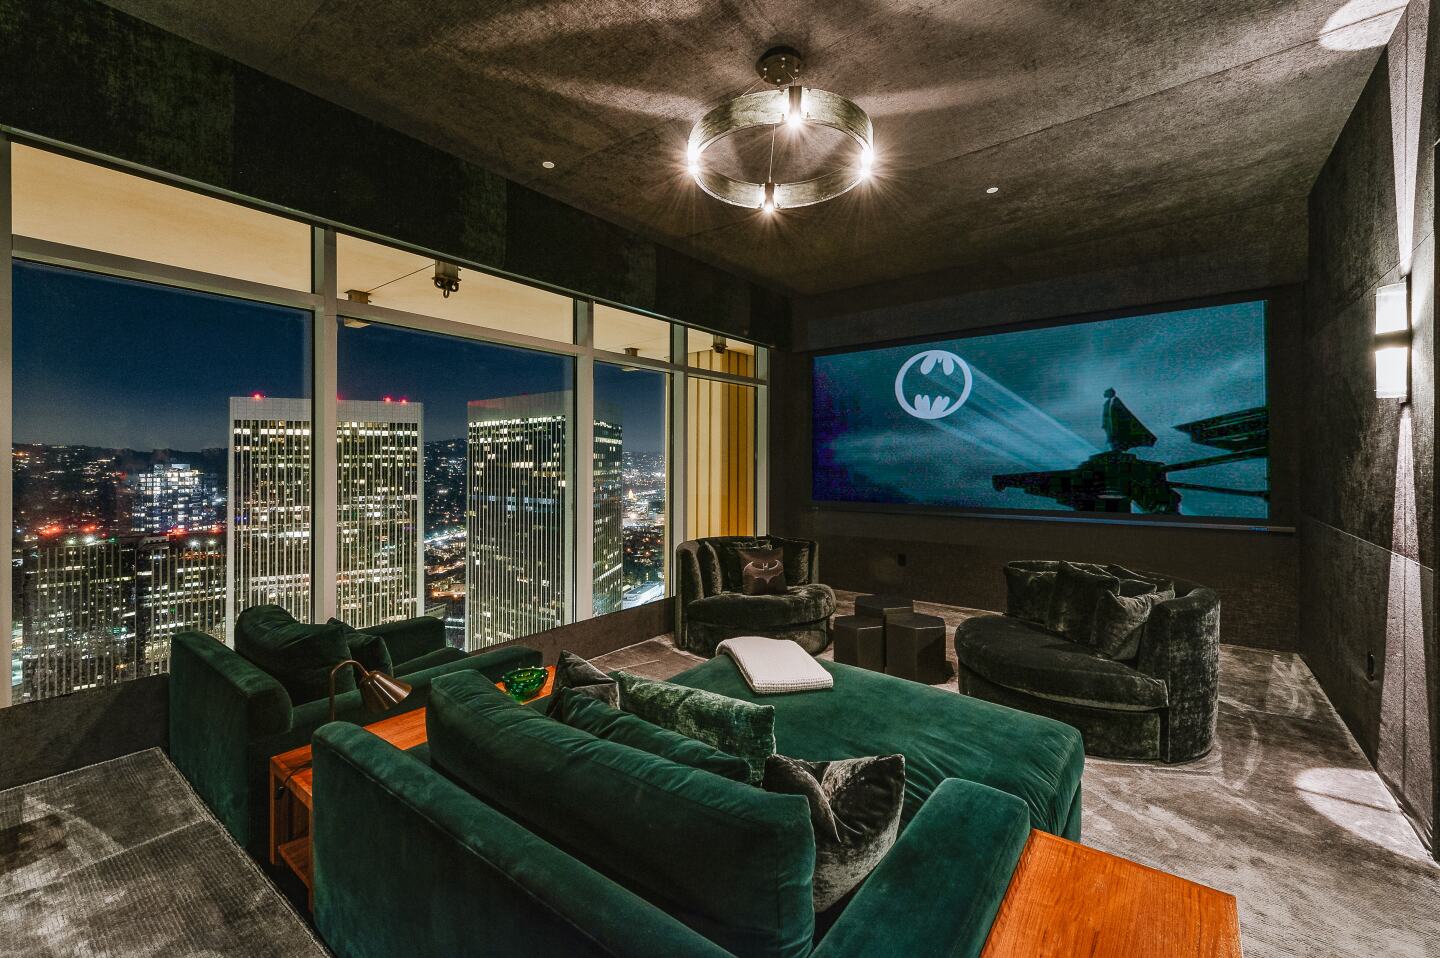 A window has an expansive city view in a room with couches and an oversized screen.